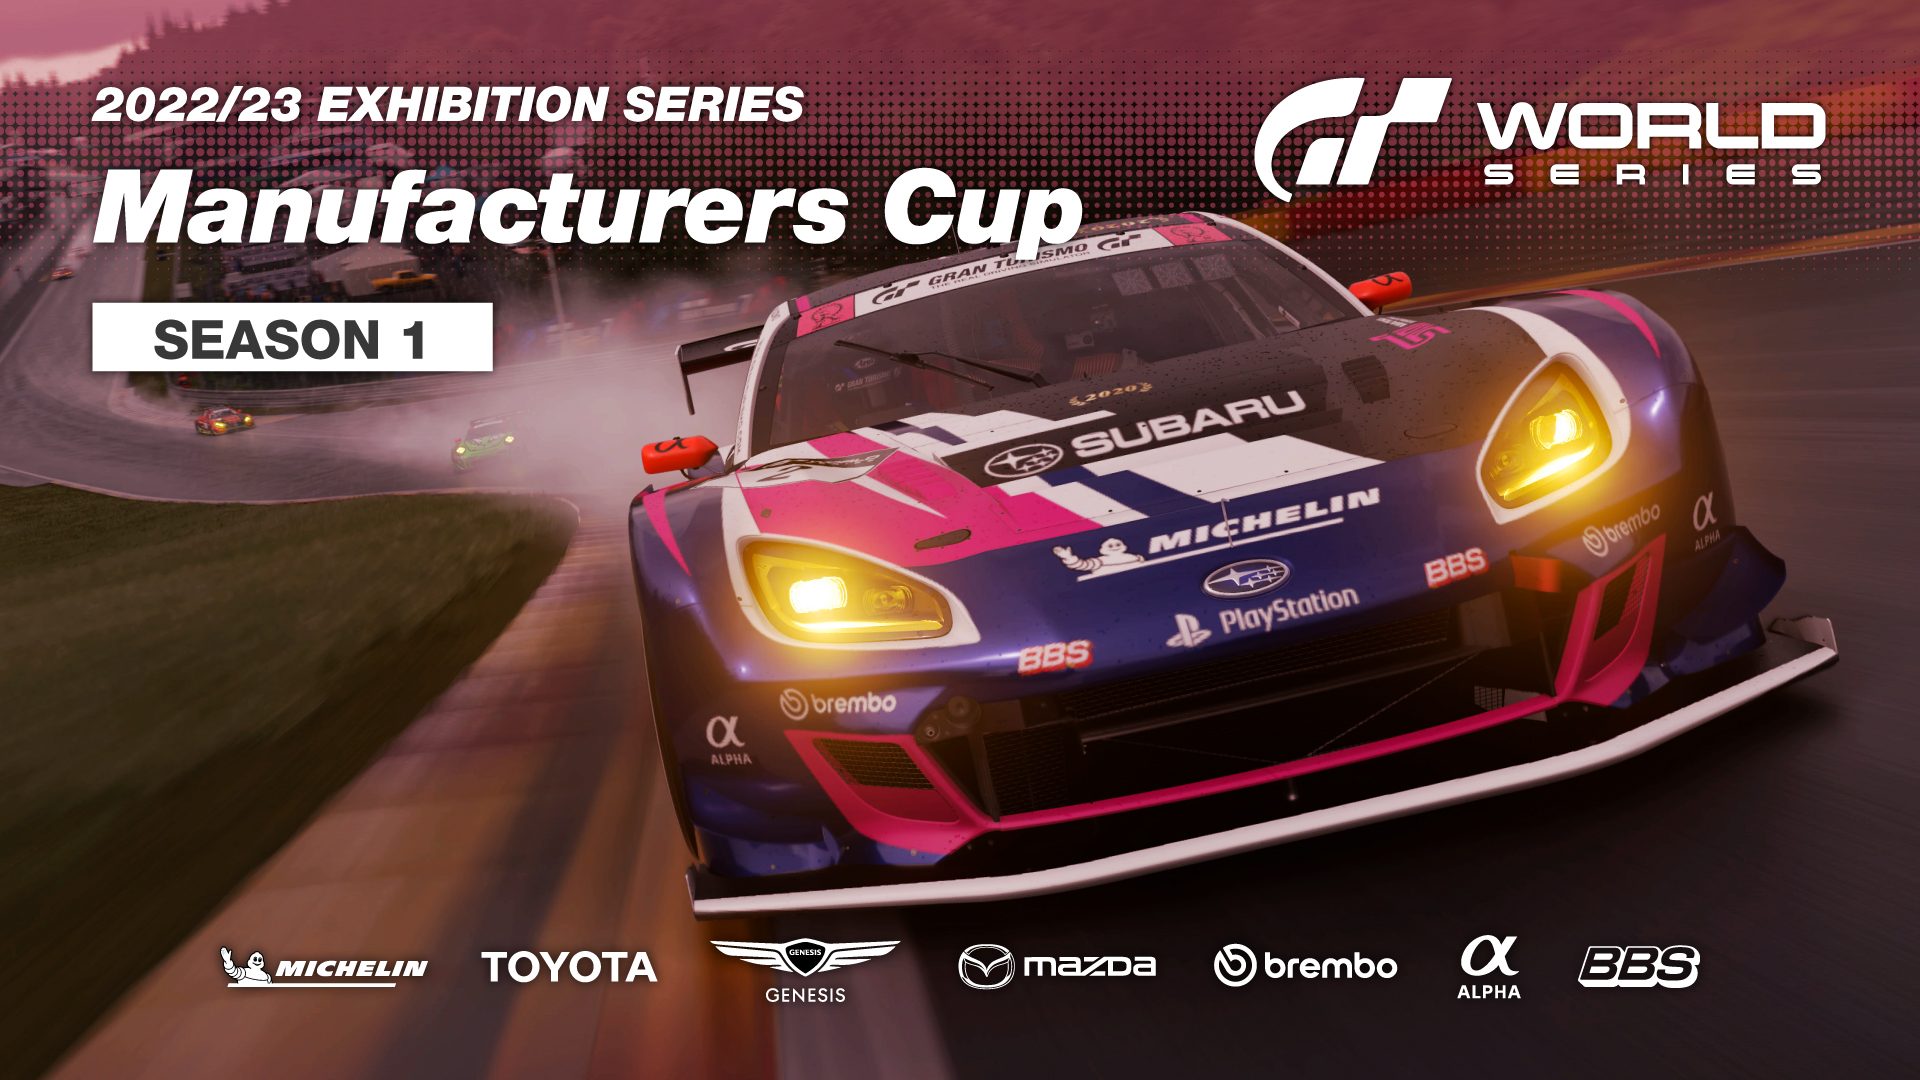 Opening of the 'Gran Turismo World Series' Manufacturers Cup 2022/23